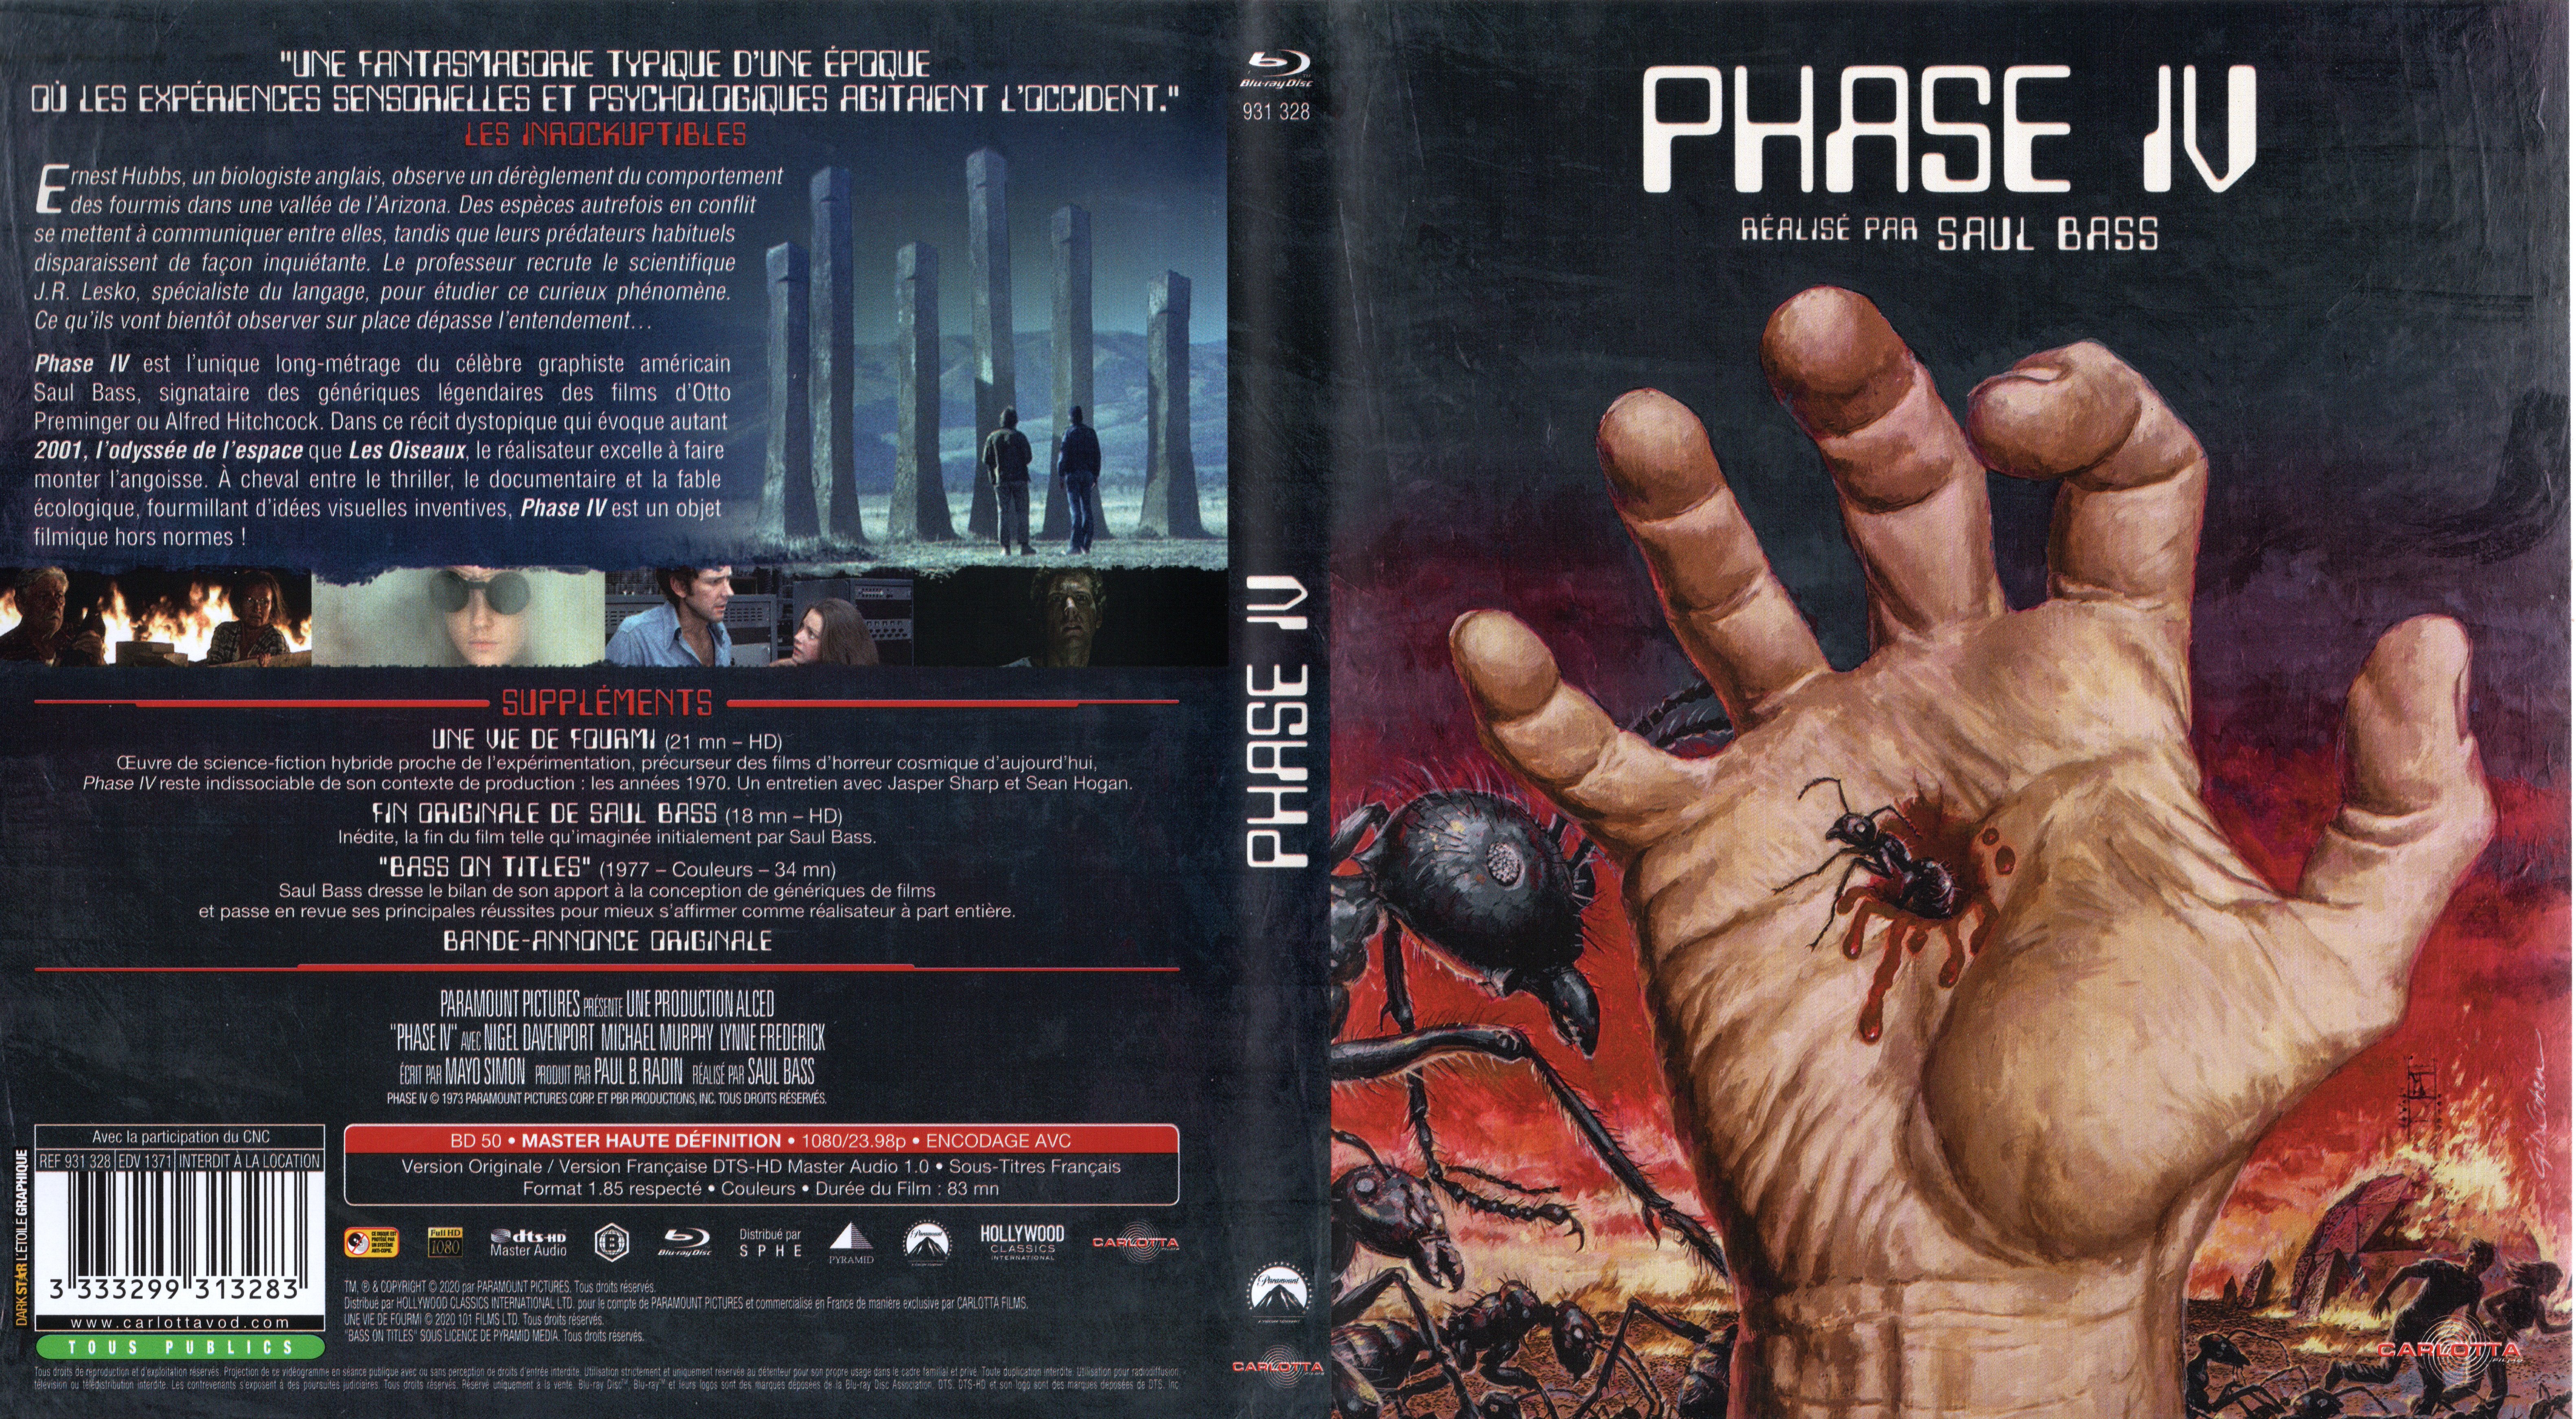 Jaquette DVD Phase IV (1973) (BLU-RAY)